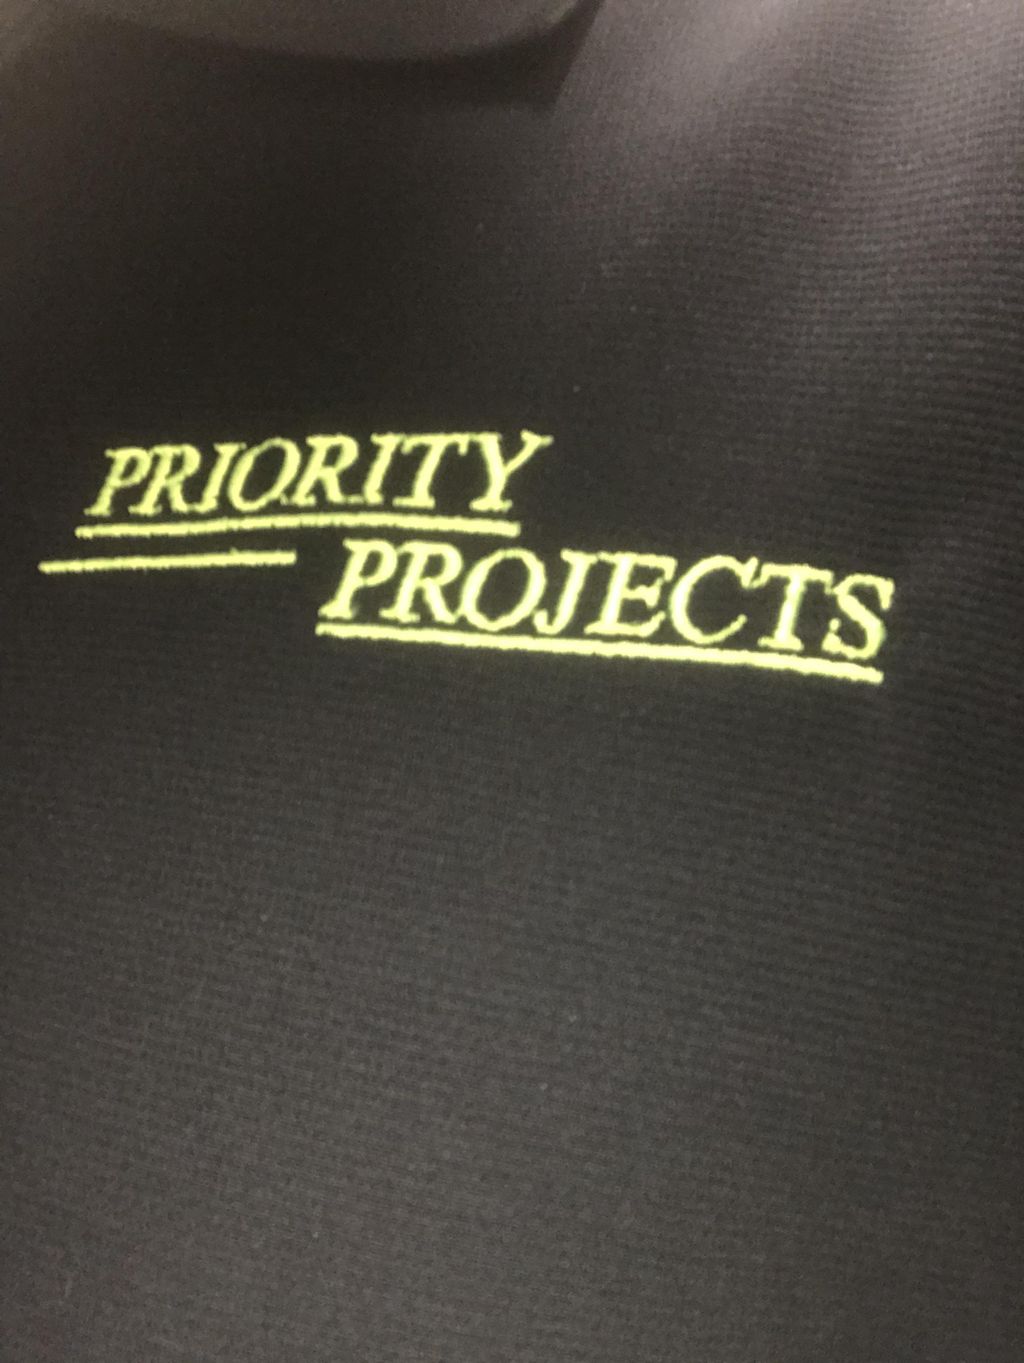 Priority Projects